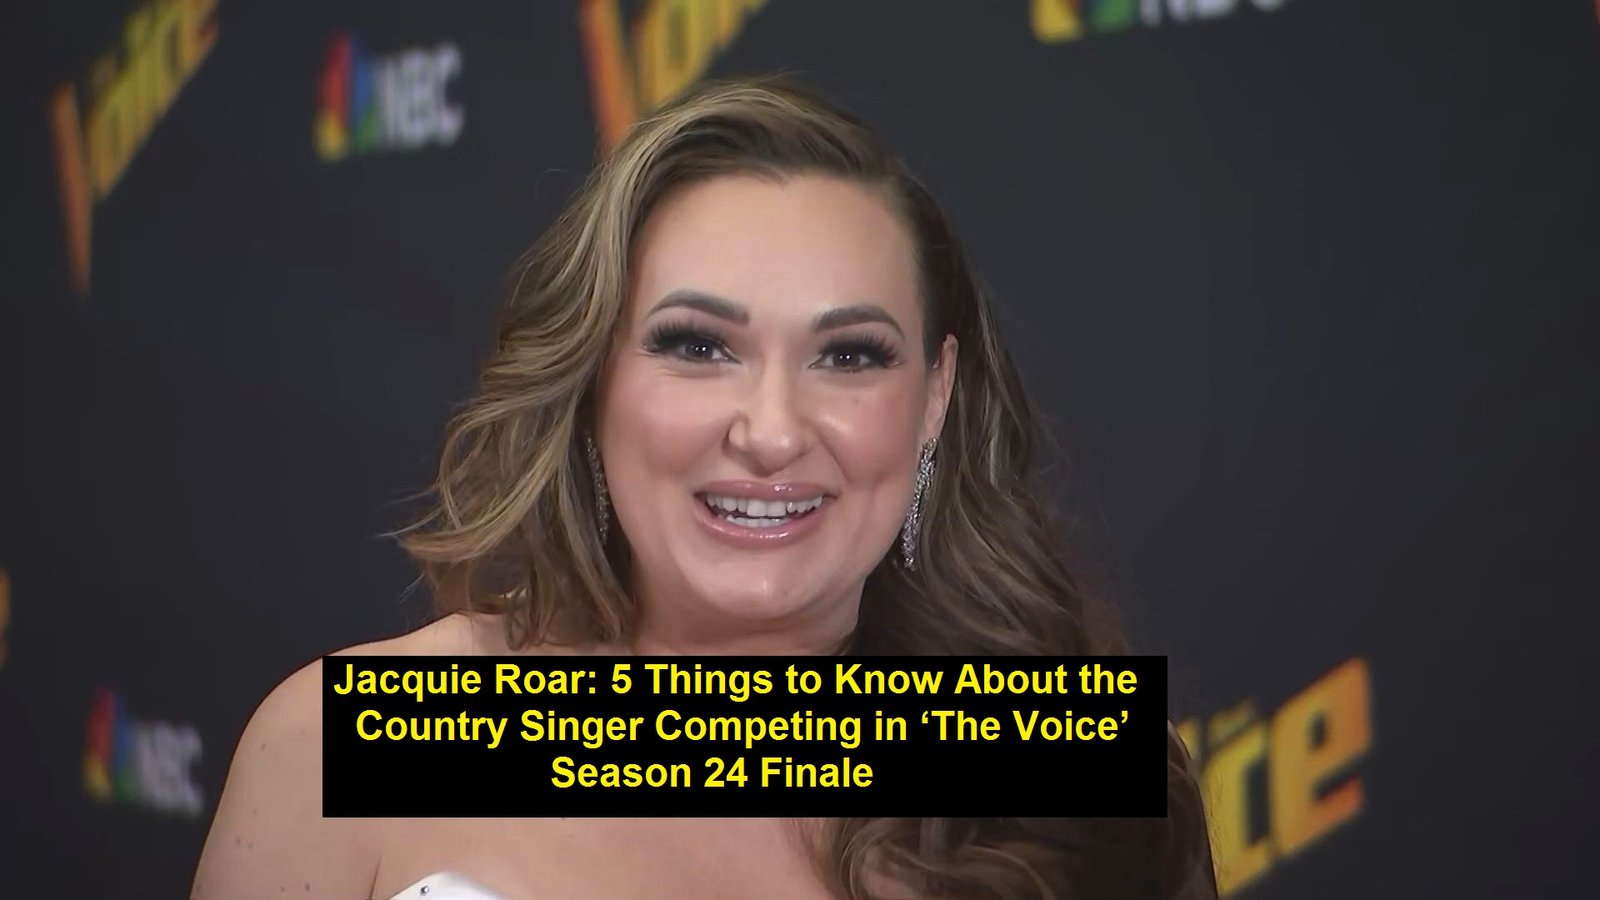 Jacquie Roar: 5 Things to Know About the Country Singer Competing in ‘The Voice’ Season 24 Finale